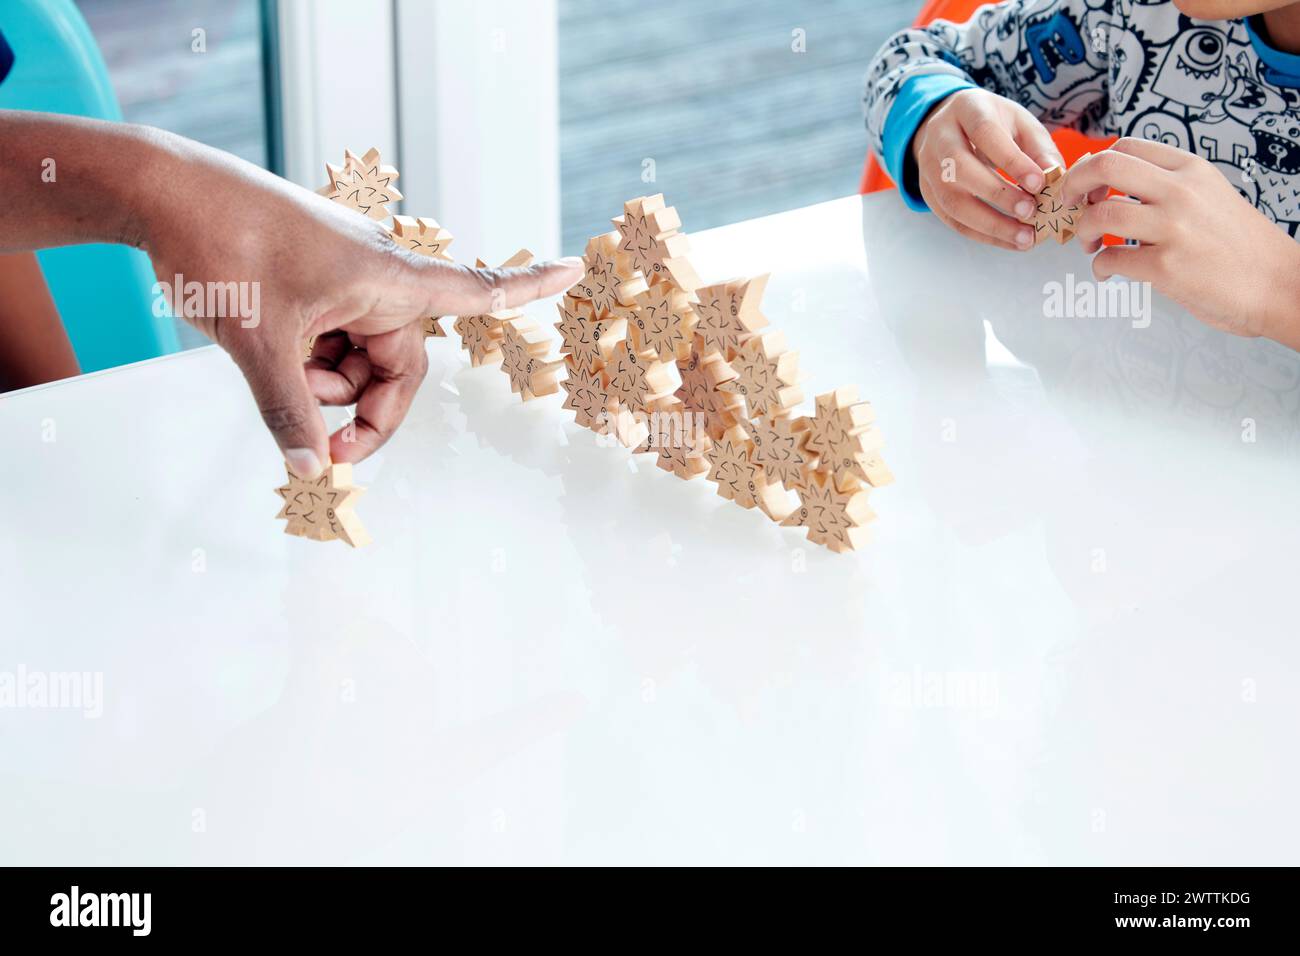 Two individuals playing with wooden star puzzles Stock Photo